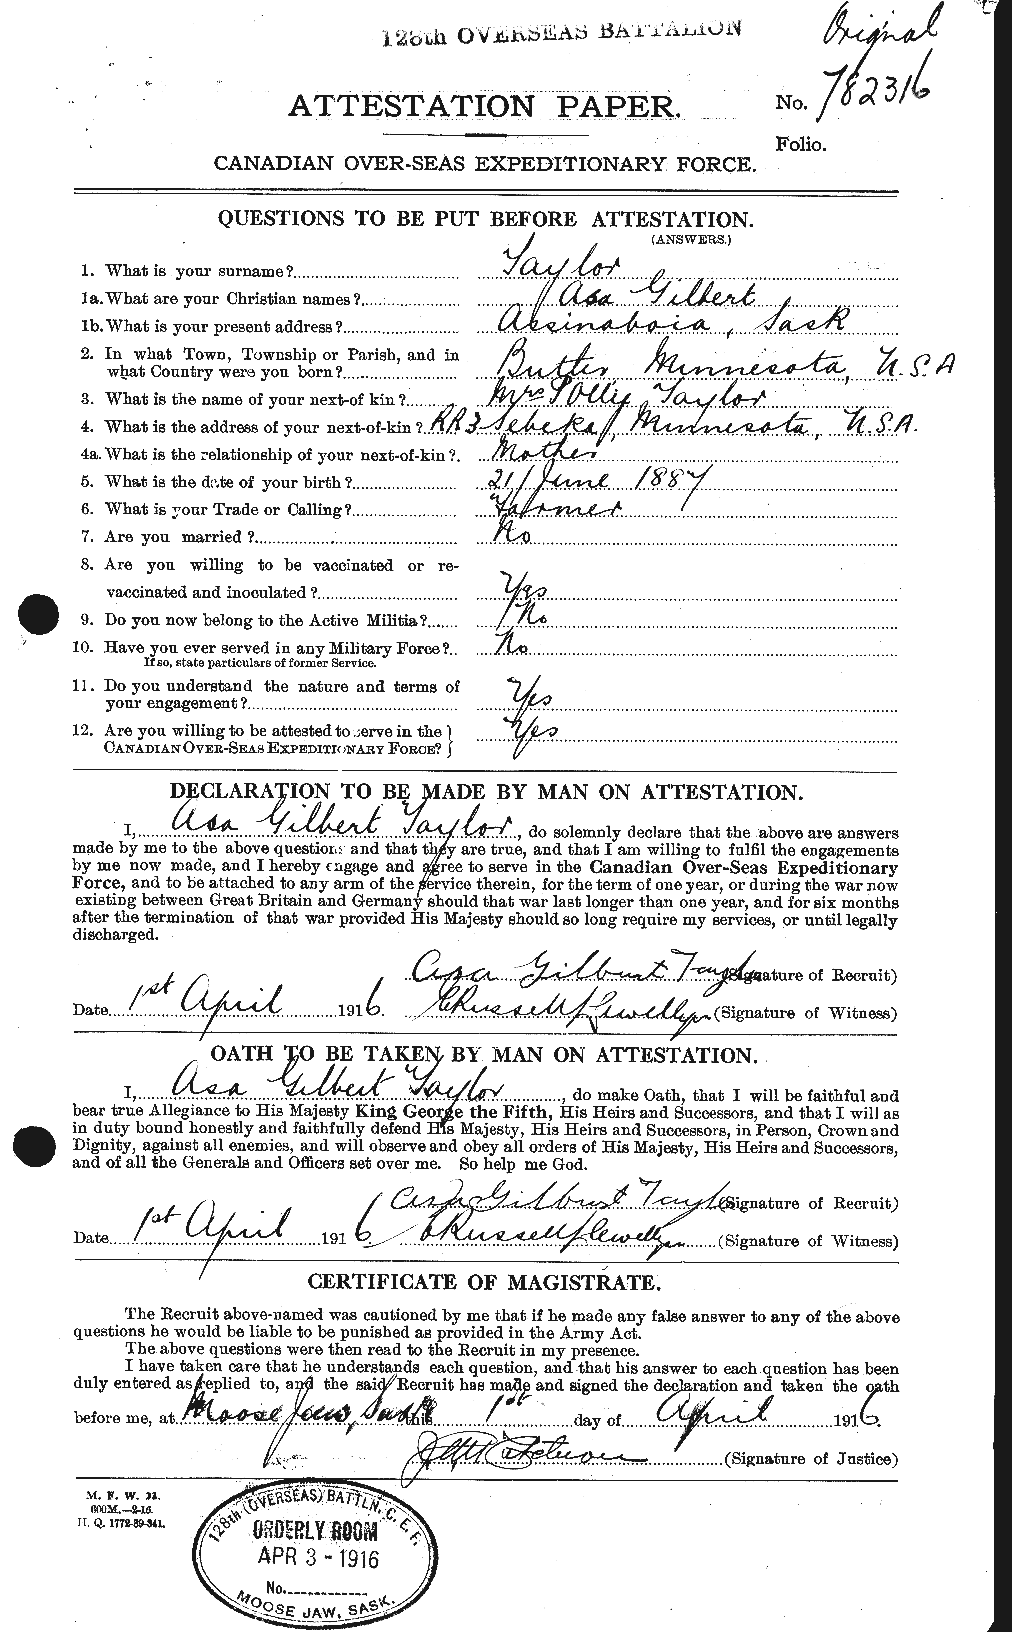 Personnel Records of the First World War - CEF 626752a